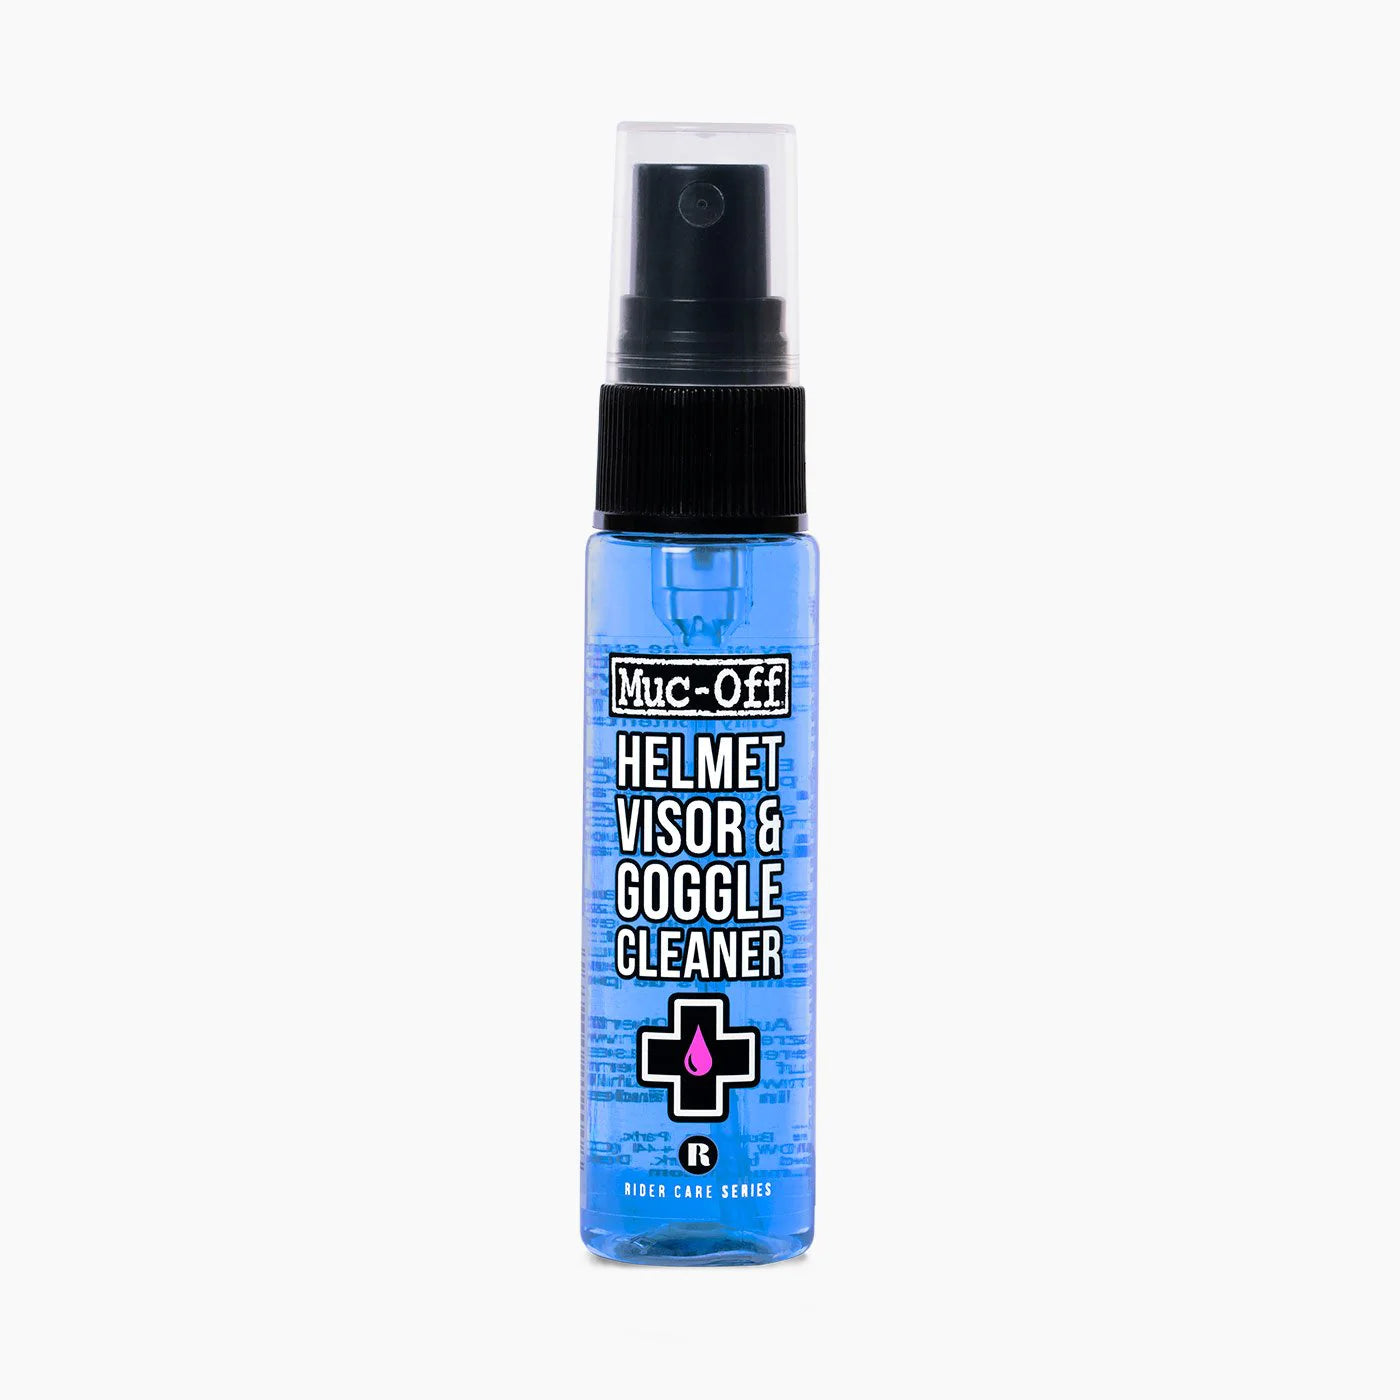 Muc-off Helmet & Goggle Cleaner 250ml bottle with spray nozzle